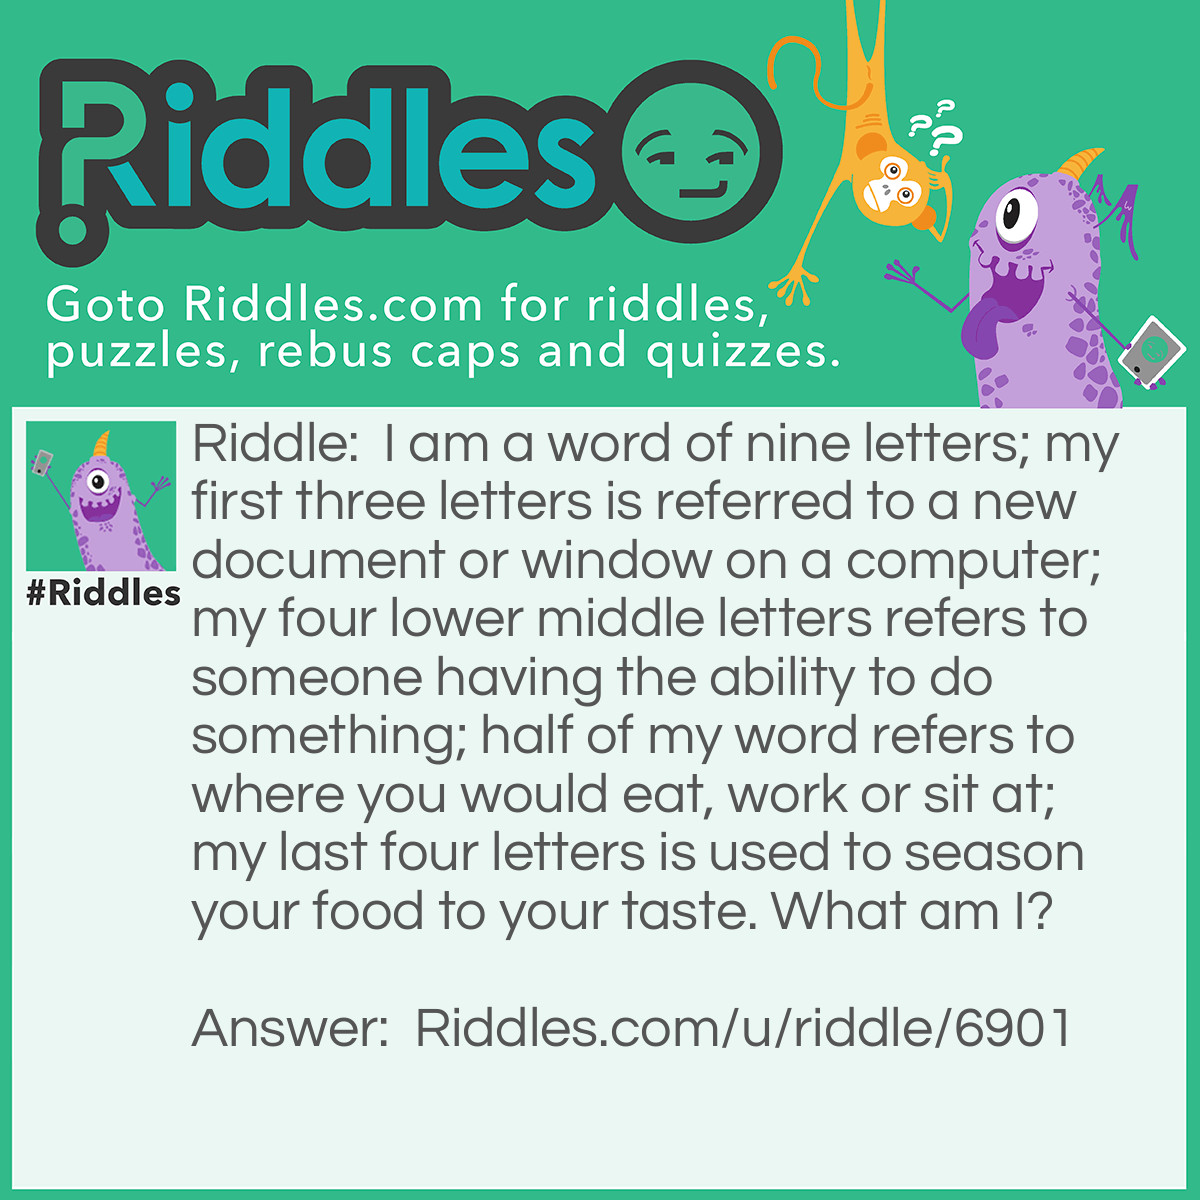 Riddle: I am a word of nine letters; my first three letters is referred to a new document or window on a computer; my four lower middle letters refers to someone having the ability to do something; half of my word refers to where you would eat, work or sit at; my last four letters is used to season your food to your taste. What am I? Answer: Tablesalt